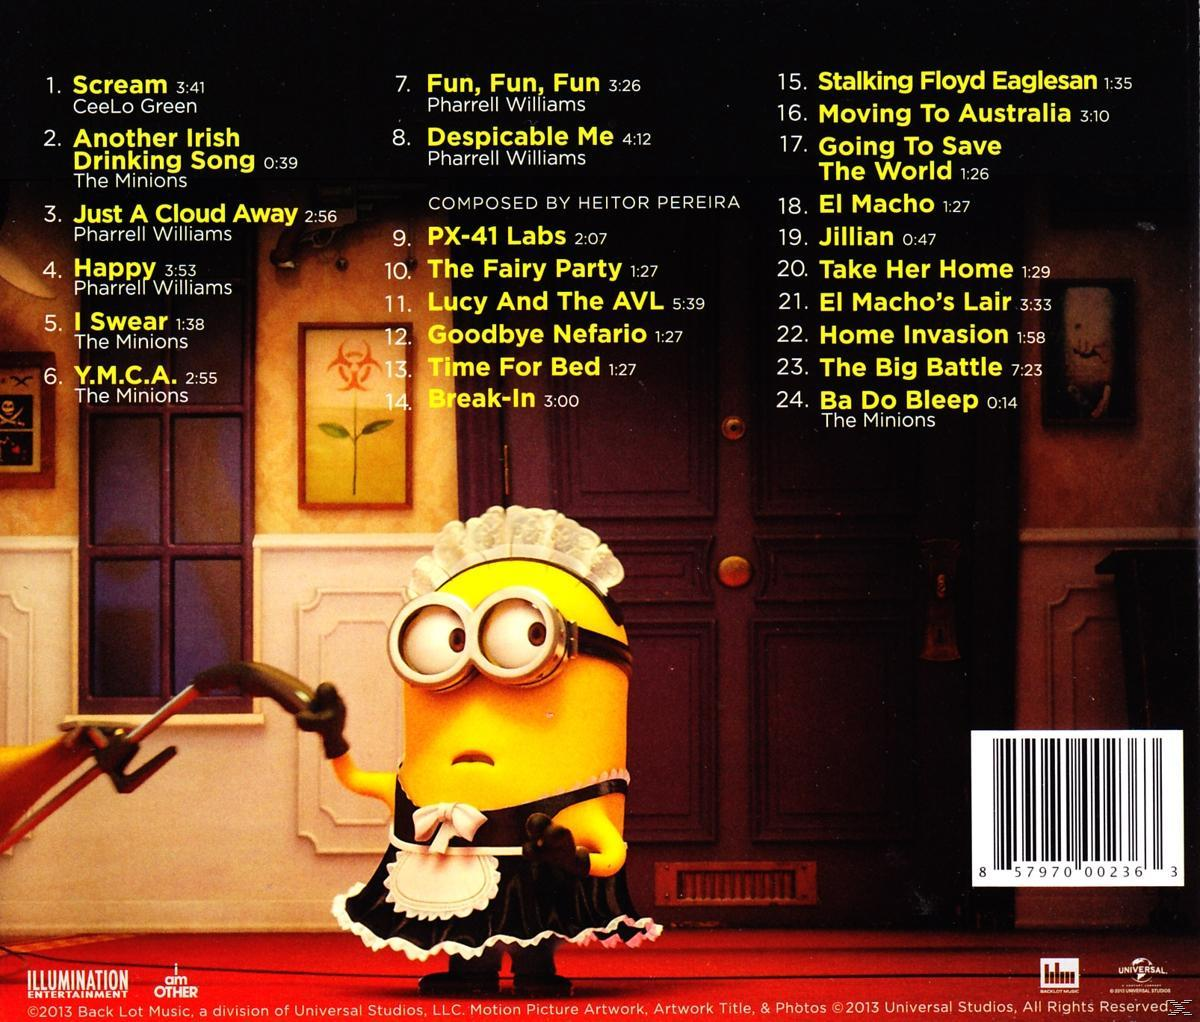 2 Despicable Williams (CD) Me Pharrell - -